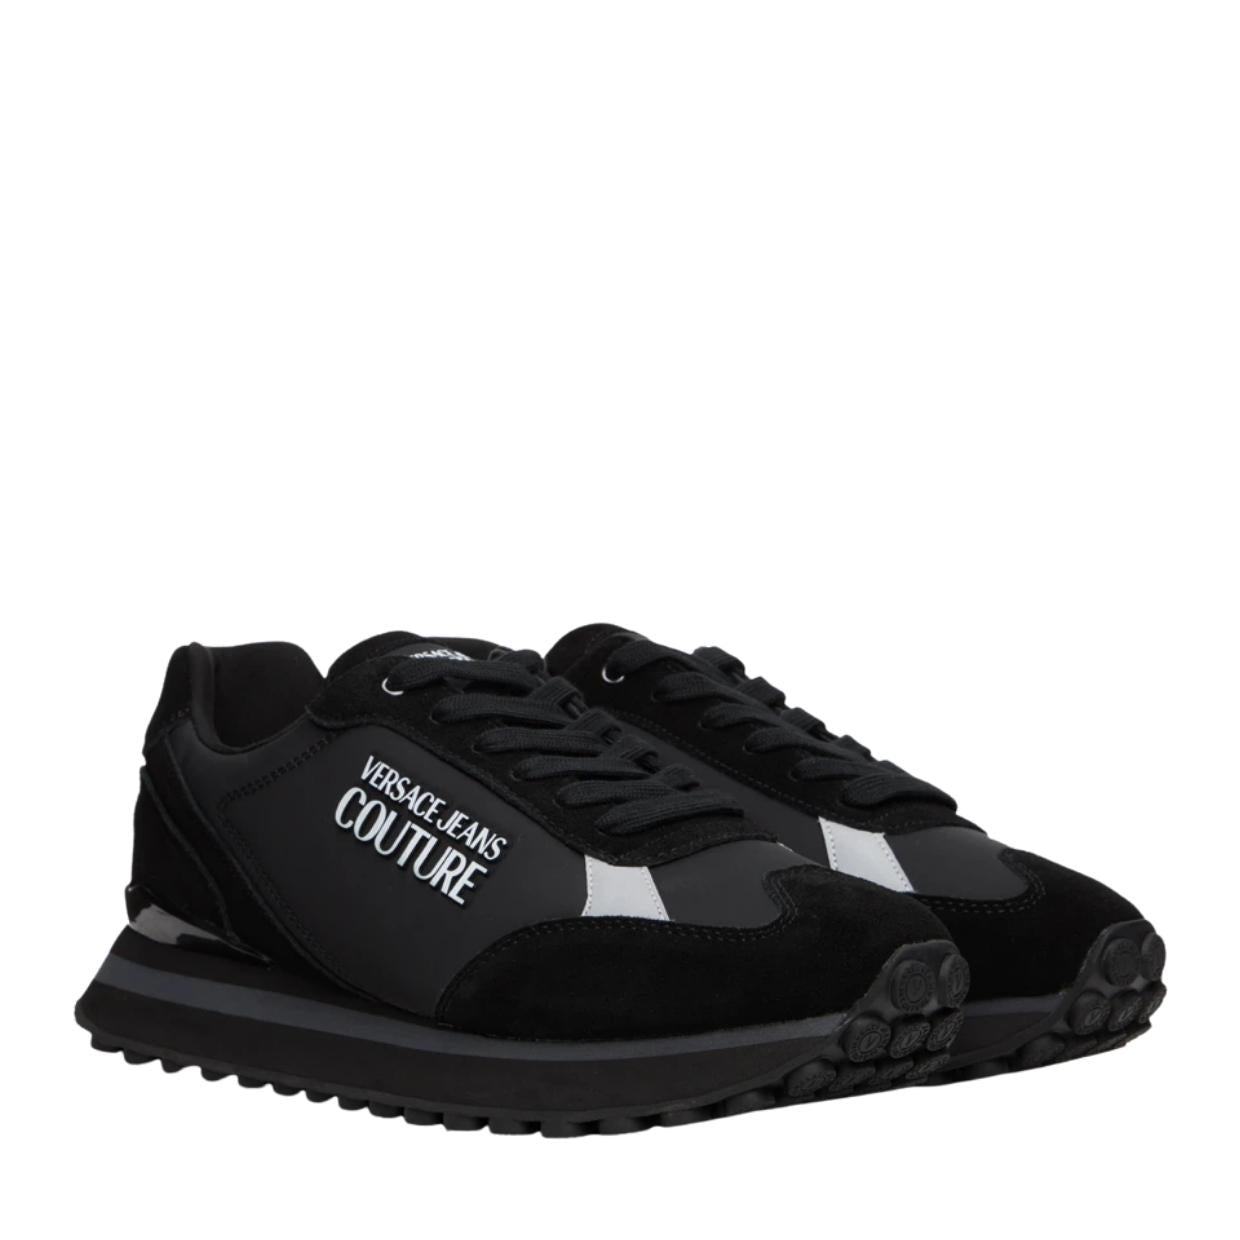 Versace Jeans Couture Spyke Black Trainers